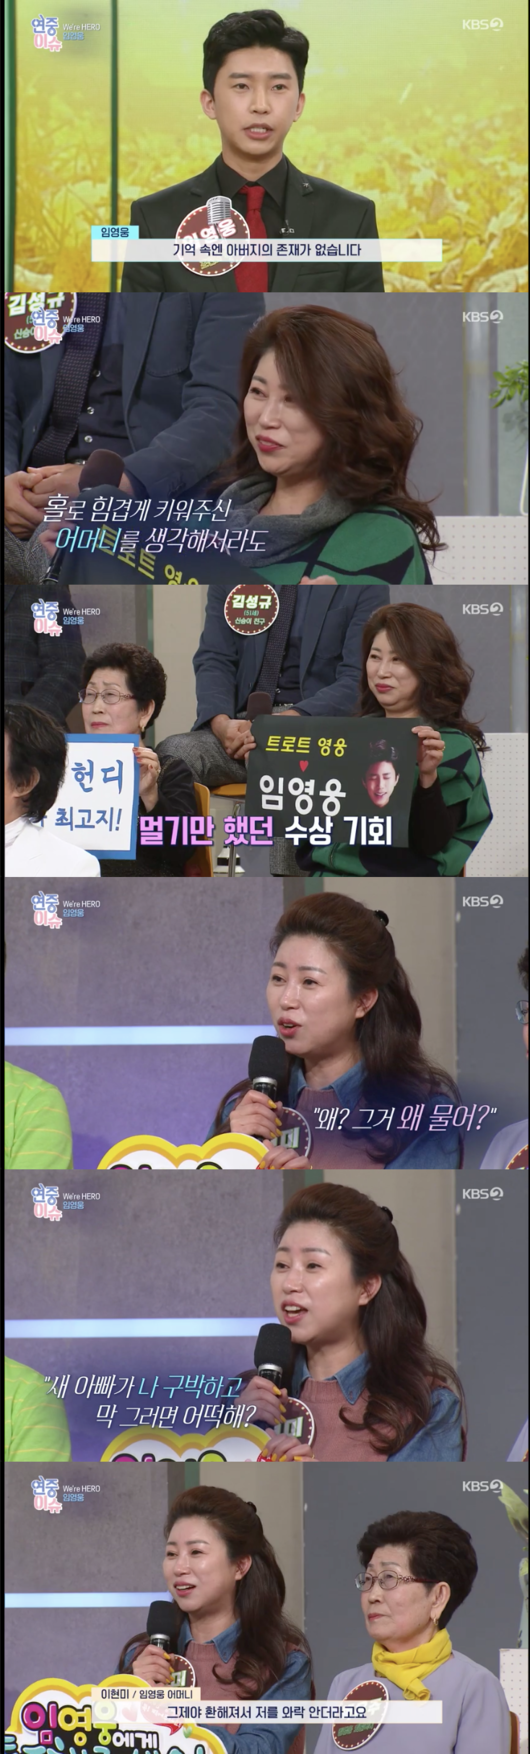 Year-round live Lim Young-woongs mother revealed Lim Young-woongs childhood anecdote in past broadcasts.In the KBS2 live broadcast Year-round live on the afternoon of the 24th, the preview of the first solo performance Were HERO Lim Young-woong prepared by Lim Young-woong, a hero of the music industry, for all the hard work of the year in 2021Kim Seung-hye visited the filming scene of the KBS drama Taejong of Joseon One, which is gathering topics every day.An interview with Ju Sang Book and Jin-hie Park, the leading actors of the Taejong of Joseon One, followed.Ju Sang Wook said, It is solemn and heavy, and it is so honorable that this day has come.Jin-hie Park also said of her roles, I envy the ability to achieve what I planned and aspirationed, and this is a woman I want to resemble in reality.I then went to Danyang to meet Kim Young-chul, who played the role of Lee Sung-gye.Kim Young-chul introduced himself as Kim Young-chul who plays the role of Lee Sung-gye.I am grateful that there are many people who fit the role of Lee Sung-jae, he said with a pleasant smile.Lim Young-woongs first solo performance Were HERO Lim Young-woong, which is like a Christmas gift, was released.In the past broadcast, a video of Lim Young-woong, who introduces himself, saying, Its Lim Young-woong who is part-time at Hongdae Cafe, was released.Lee Hye-jae also said, It is a precious broadcast.Lim Young-woong also appeared in the Morning Yard. Lim Young-woong said, I was thin early. There is no father in my memory.I want to succeed as a singer even if I think of my mother who has helped me with my own strength. I knocked on the door of all the music festivals, but I never won a prize. I prepared a trot instead of a ballad.I won the prize and won the first prize in the National Song Proud. Lee Hyun-mi, the mother of Lim Young-woong, who had a lot of trouble raising her son alone, said, I was young at the time and my son was young.When I asked why, he said, What if my new dad just got me and just did it? So he said, No, Im only going to live with you.I was so bright (the expression) that I was hugged, he said, tearfully.Lim Young-woong, who was reborn as the best trot singer, can meet various stages in this solo show.The dance crew hook and the collaborating stage also raised expectations.Lim Young-woongs fans commented on the performance, There is no such singer and I was sorry that the time went too fast.Year-round live broadcast screen capture